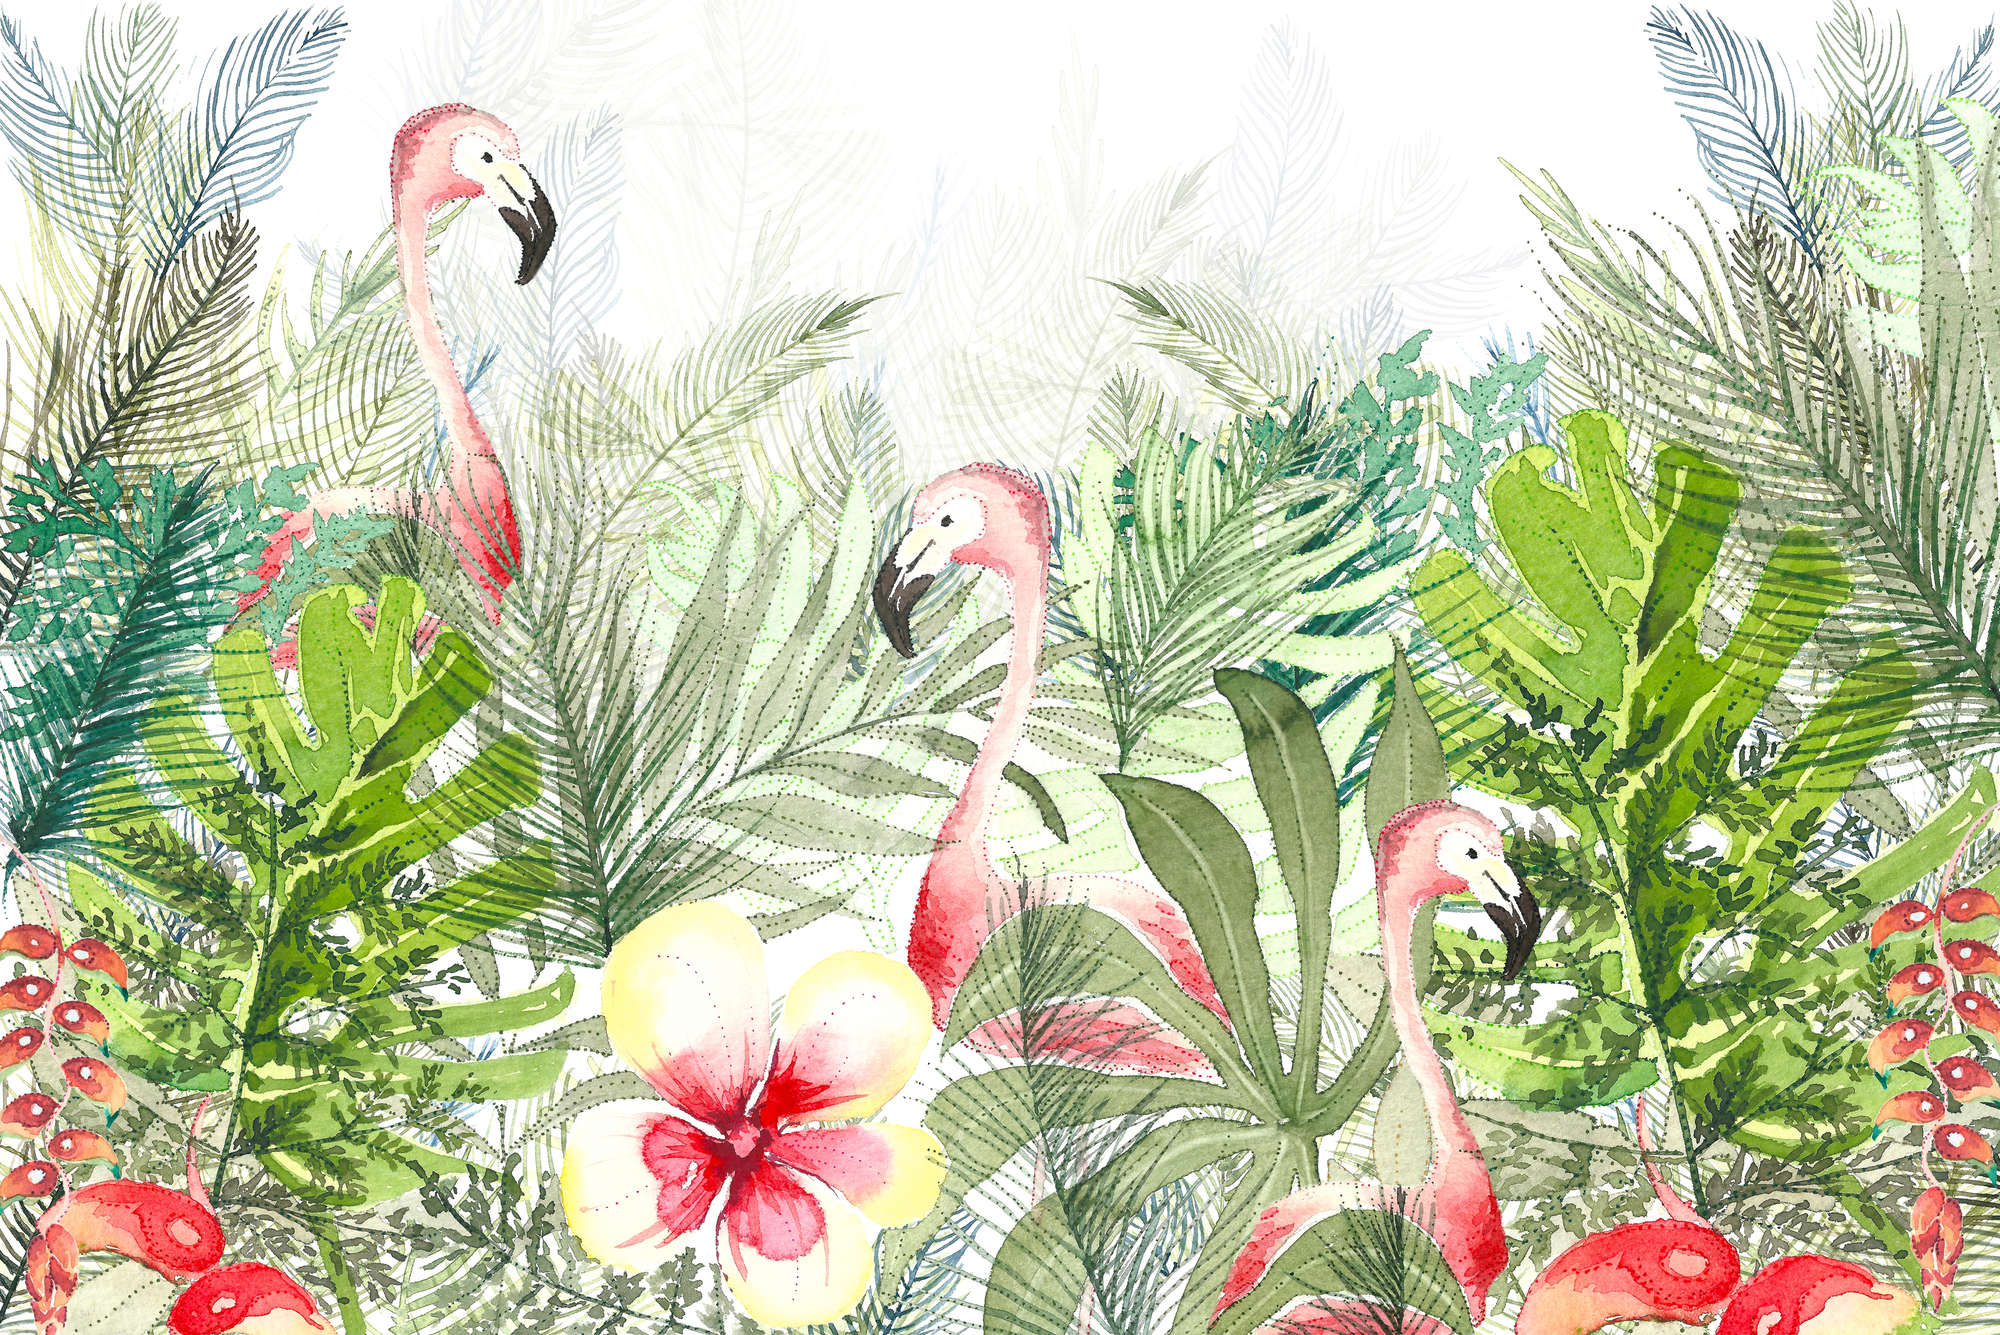             Watercolour photo wallpaper flamingo, leaves & flowers on structural non-woven
        